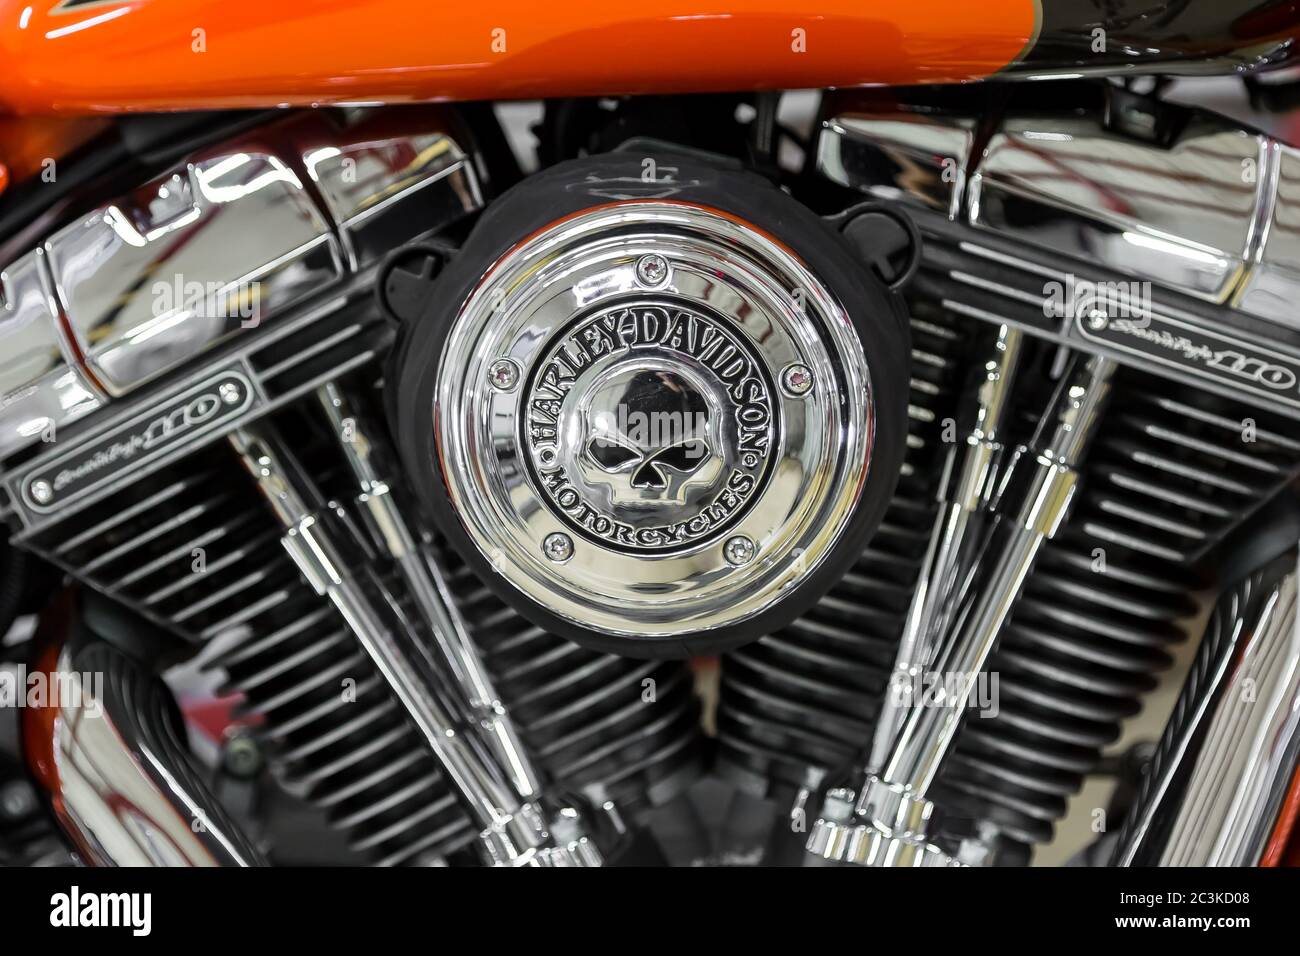 Moscow November 2018 Orange Harley Davidson Stands In The Garage Twin Cam Screamin Eagle 110 Engine Stock Photo Alamy